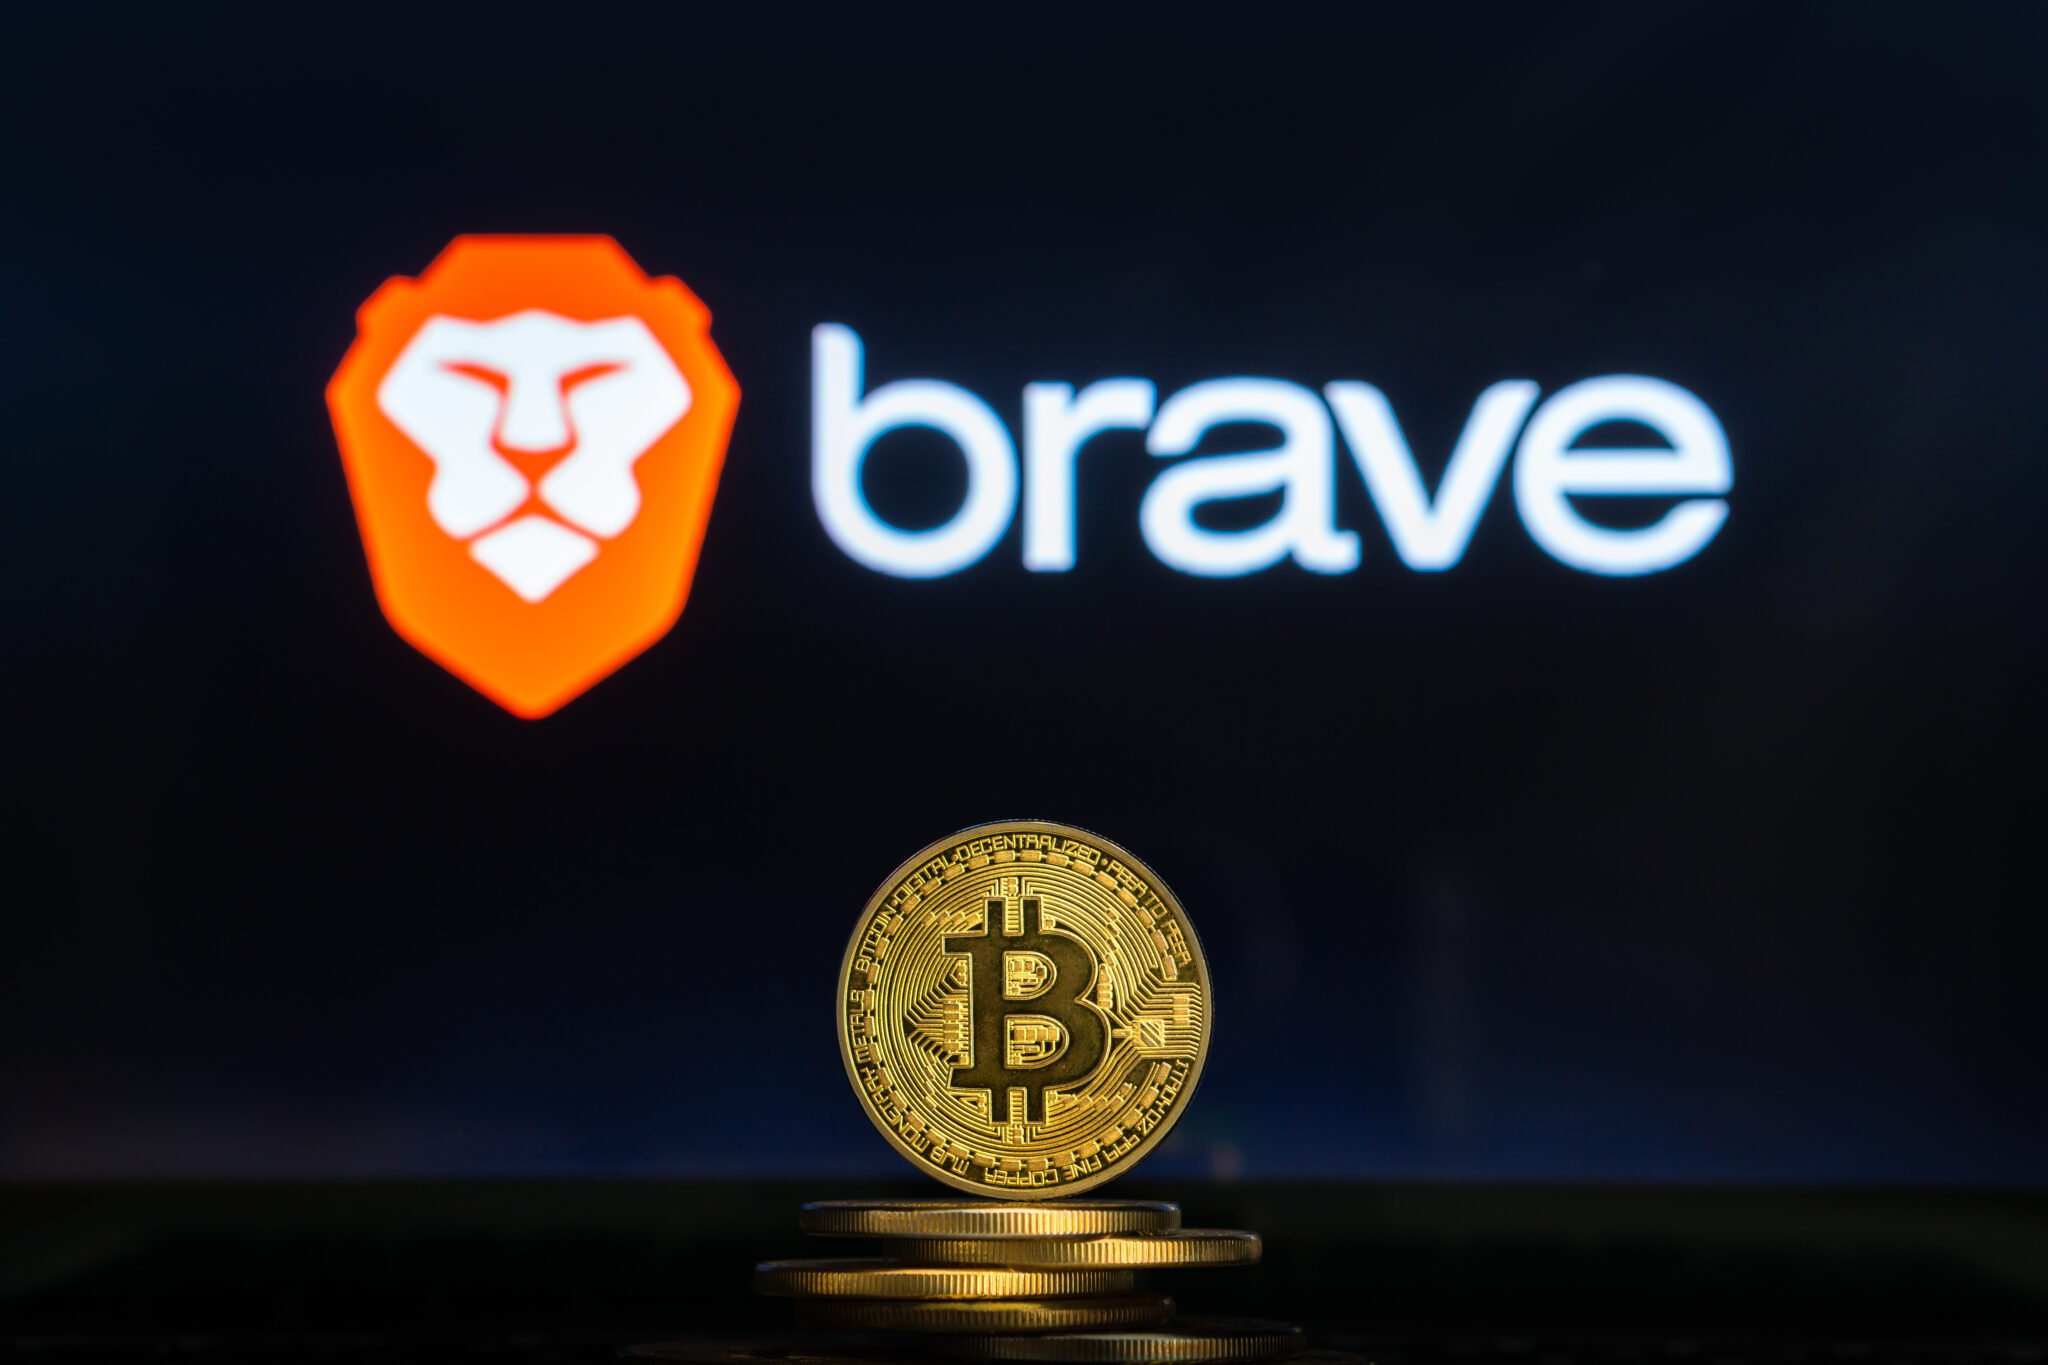 Brave logo on a computer screen with a stack of Bitcoin cryptocurency coins.